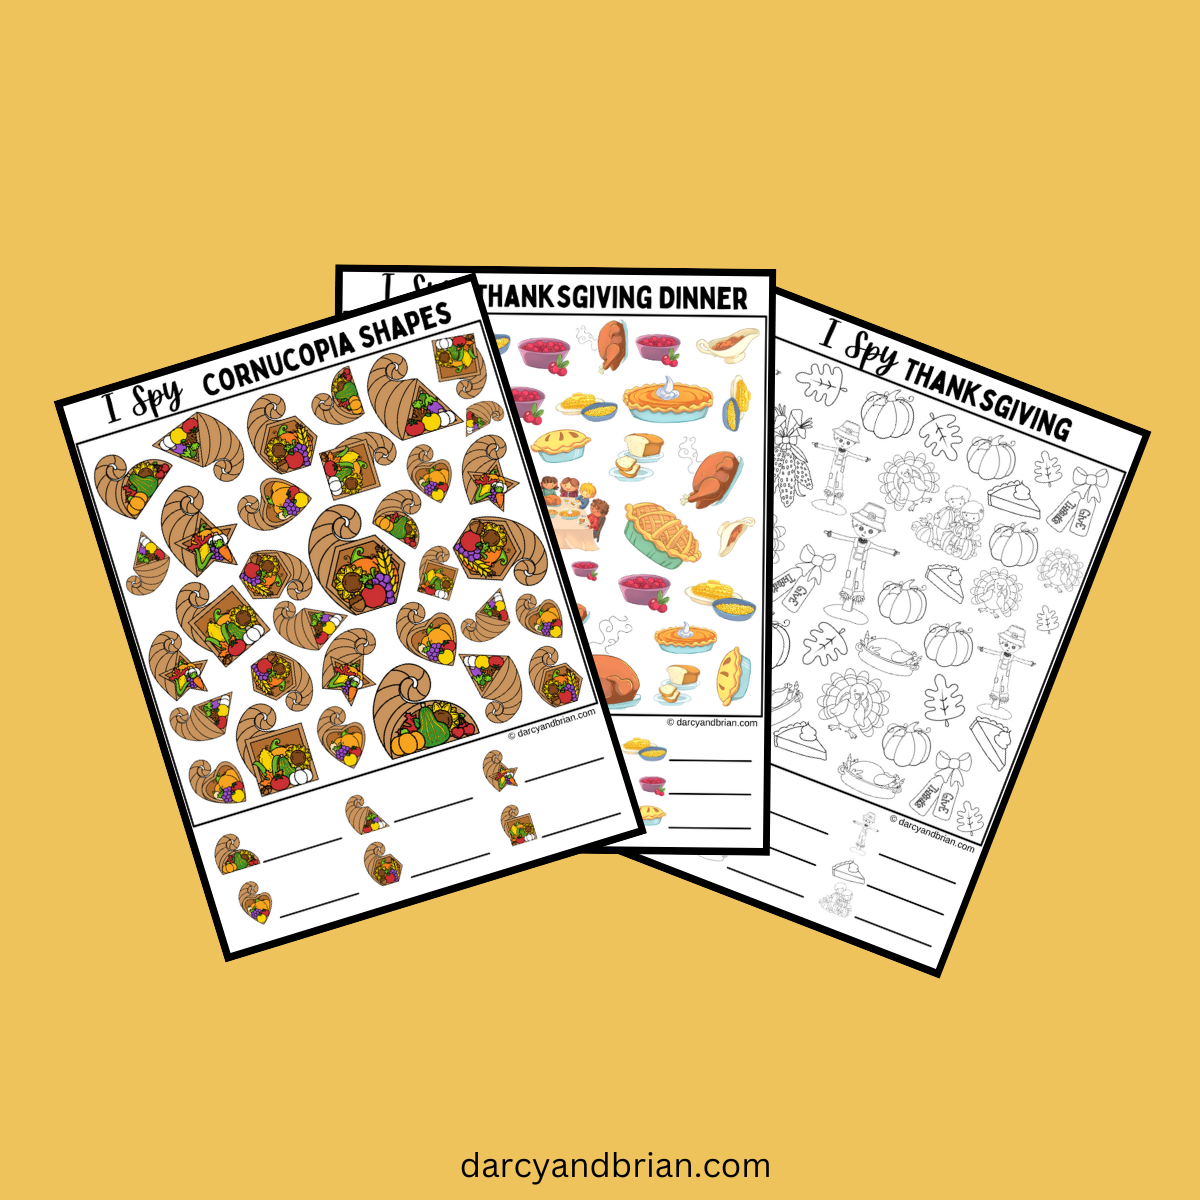 25+ Free Printable Activities for Kids - The Joy of Sharing